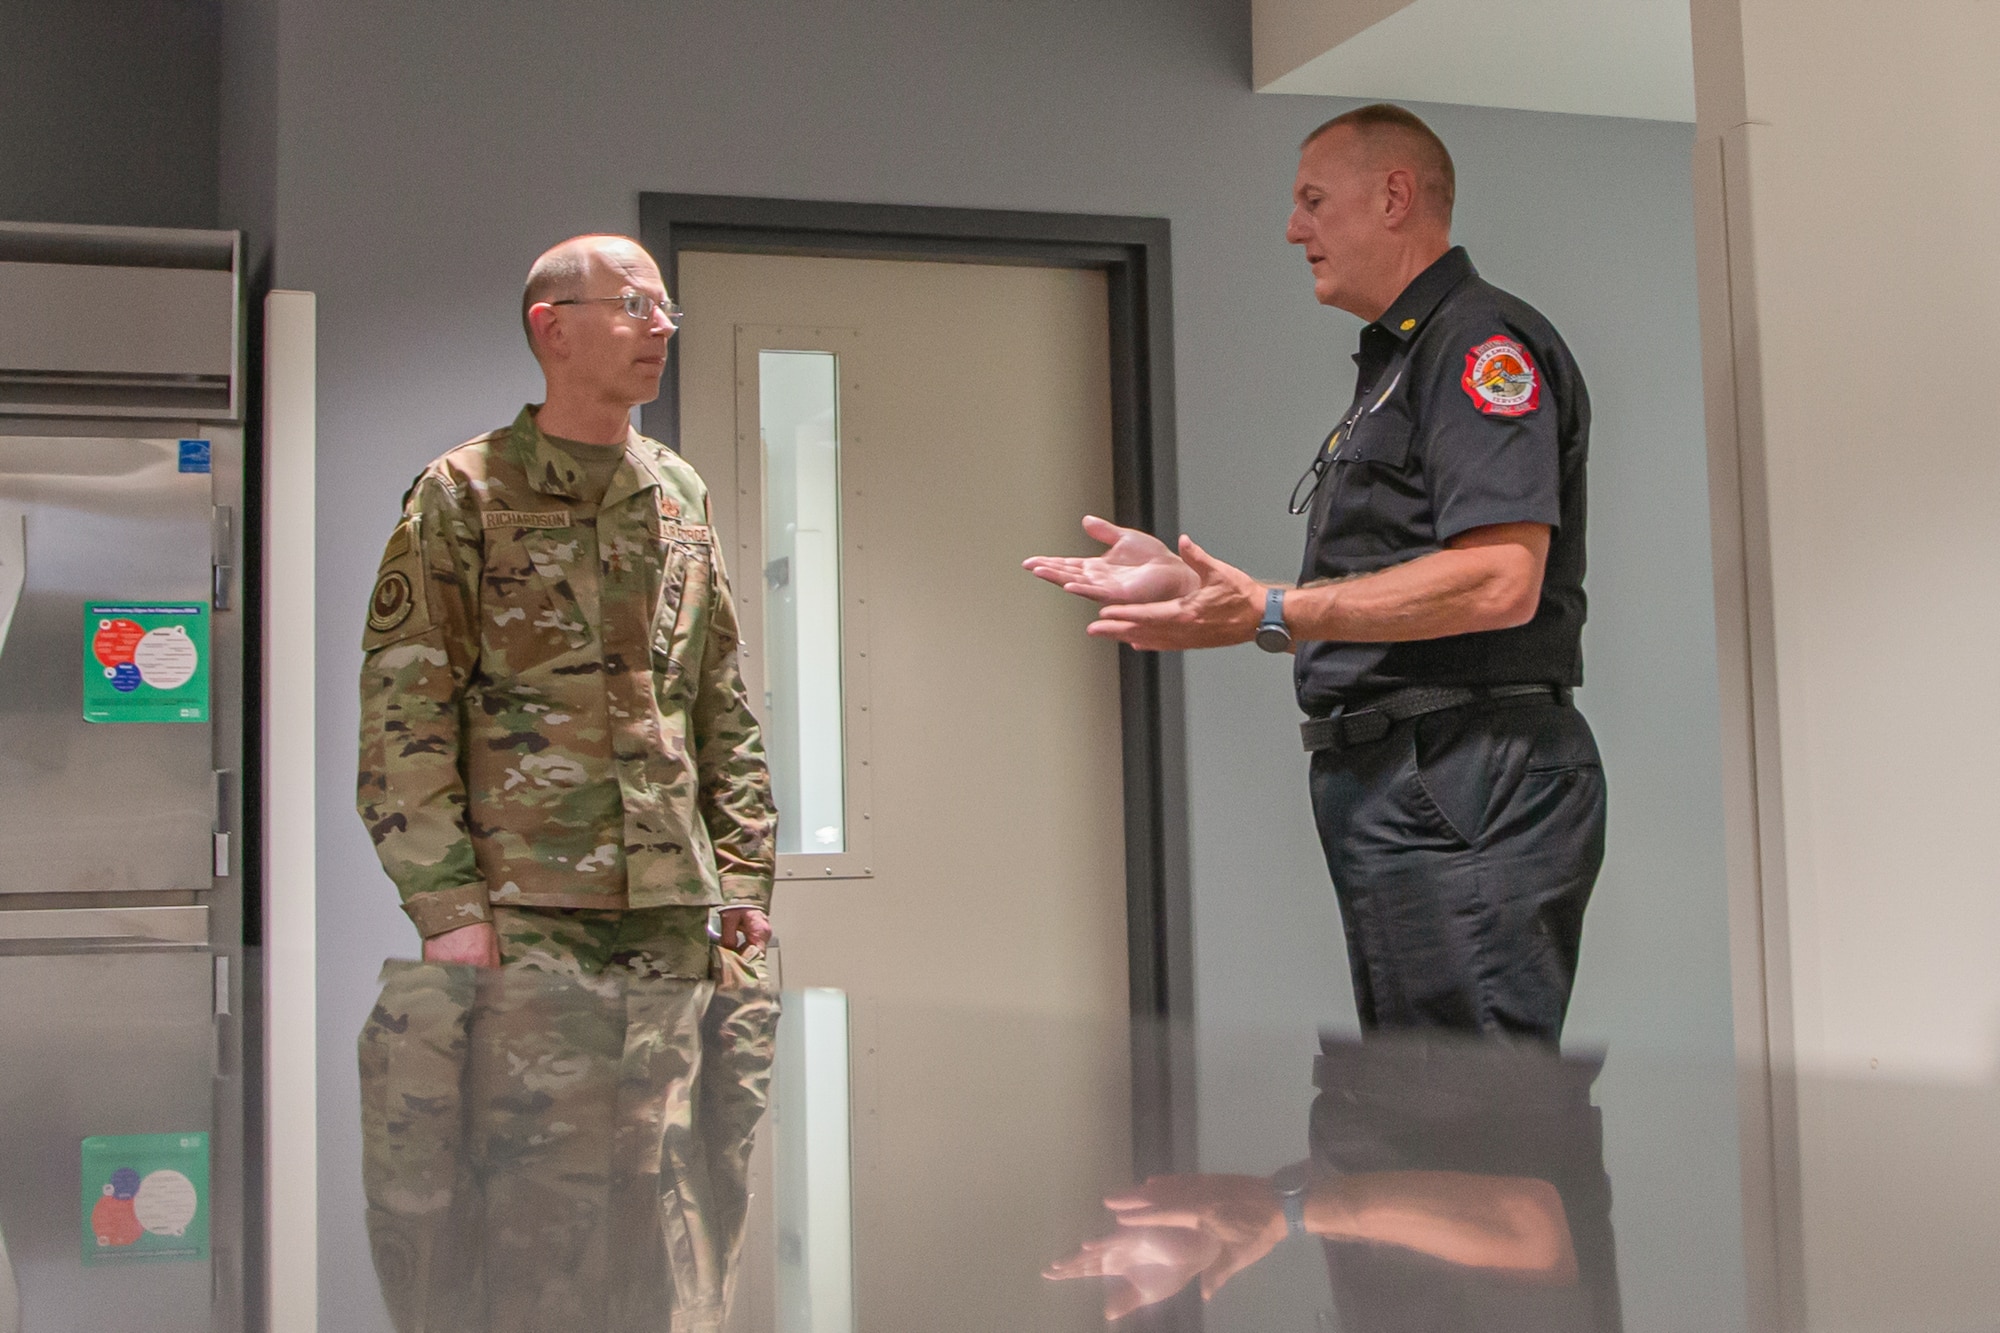 Fire and Emergency Services Chief Tim Johnson provides a tour to Gen. Duke Z. Richardson, Air Force Materiel Command commander, during his visit to Edwards Air Force Base, California, July 12. (U.S. Air Force photo by Todd Schannuth)